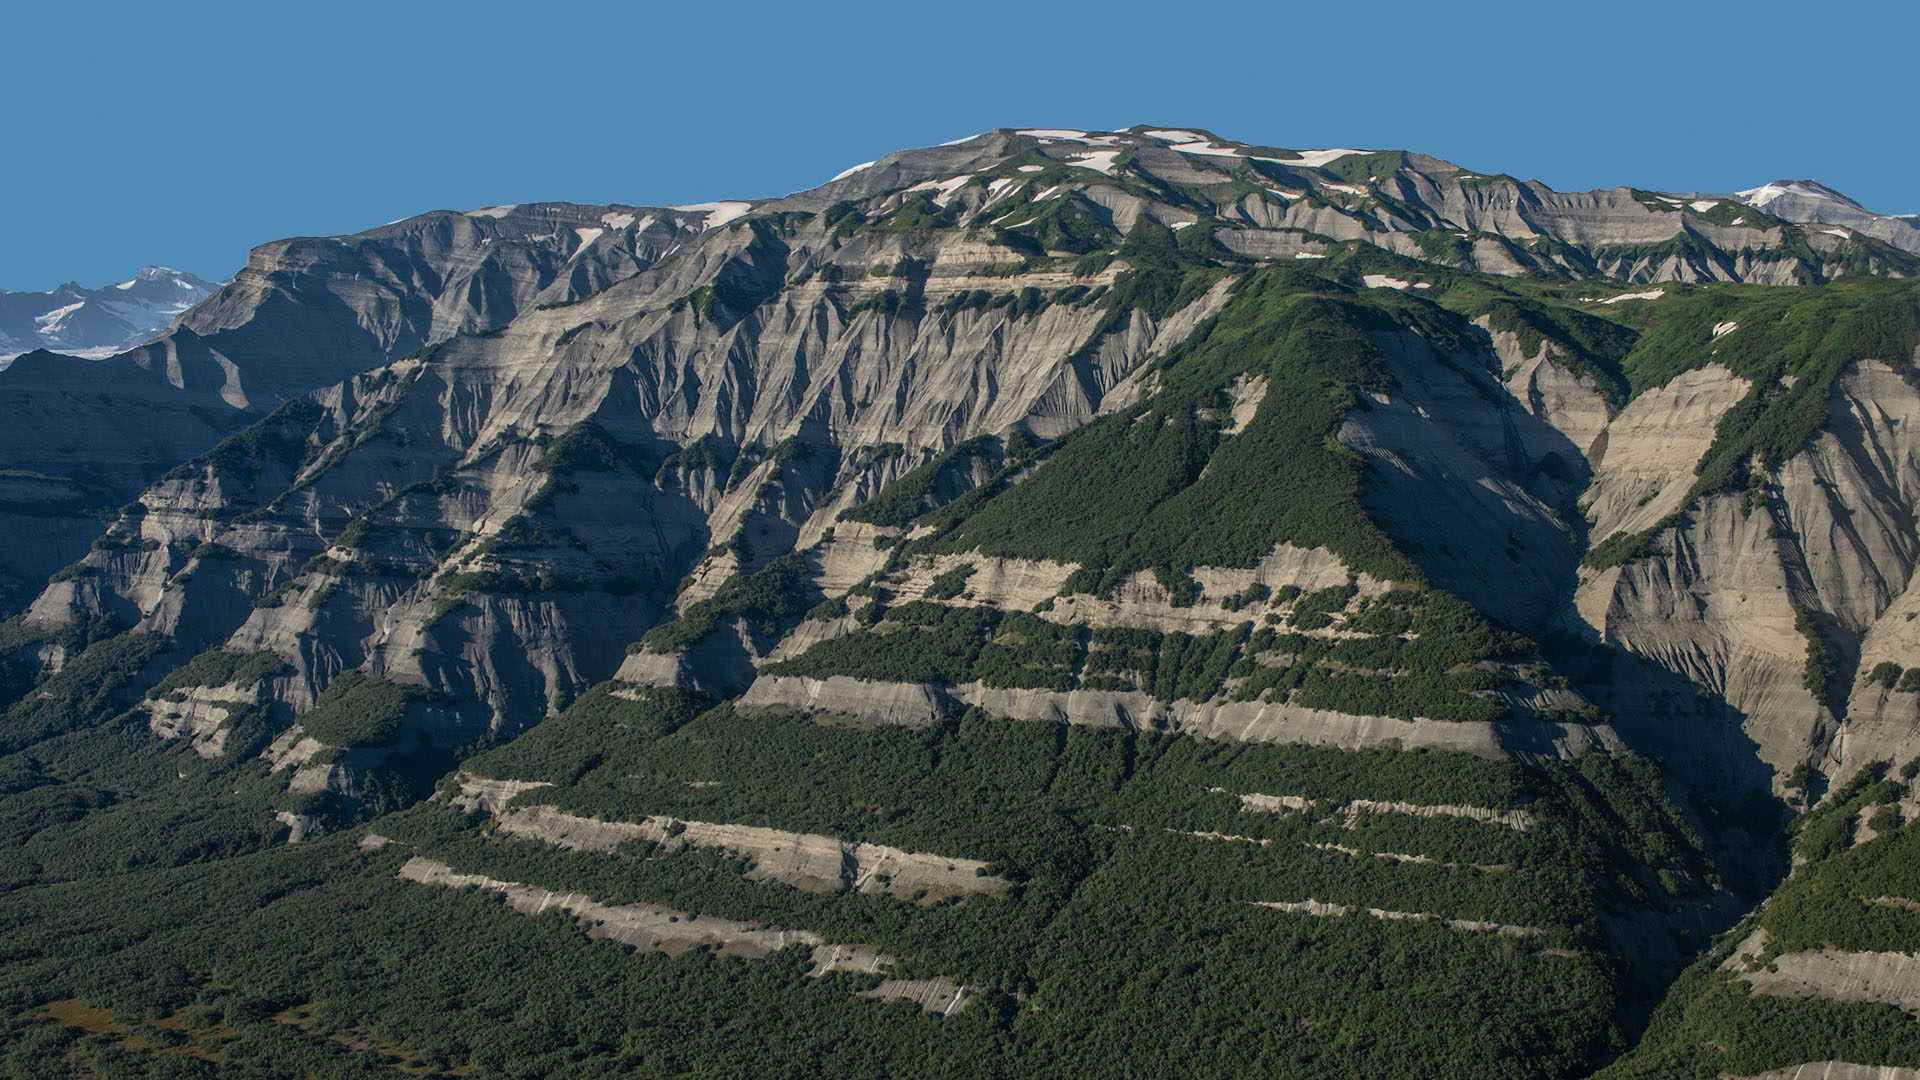 Photograph of the Karr Hills, Yakutat Terrane, southern Alaska. The photo shows eroding hills partially of exposed brown rock and partially covered with green vegetation. Small patches of snow dot the tops of the hills.